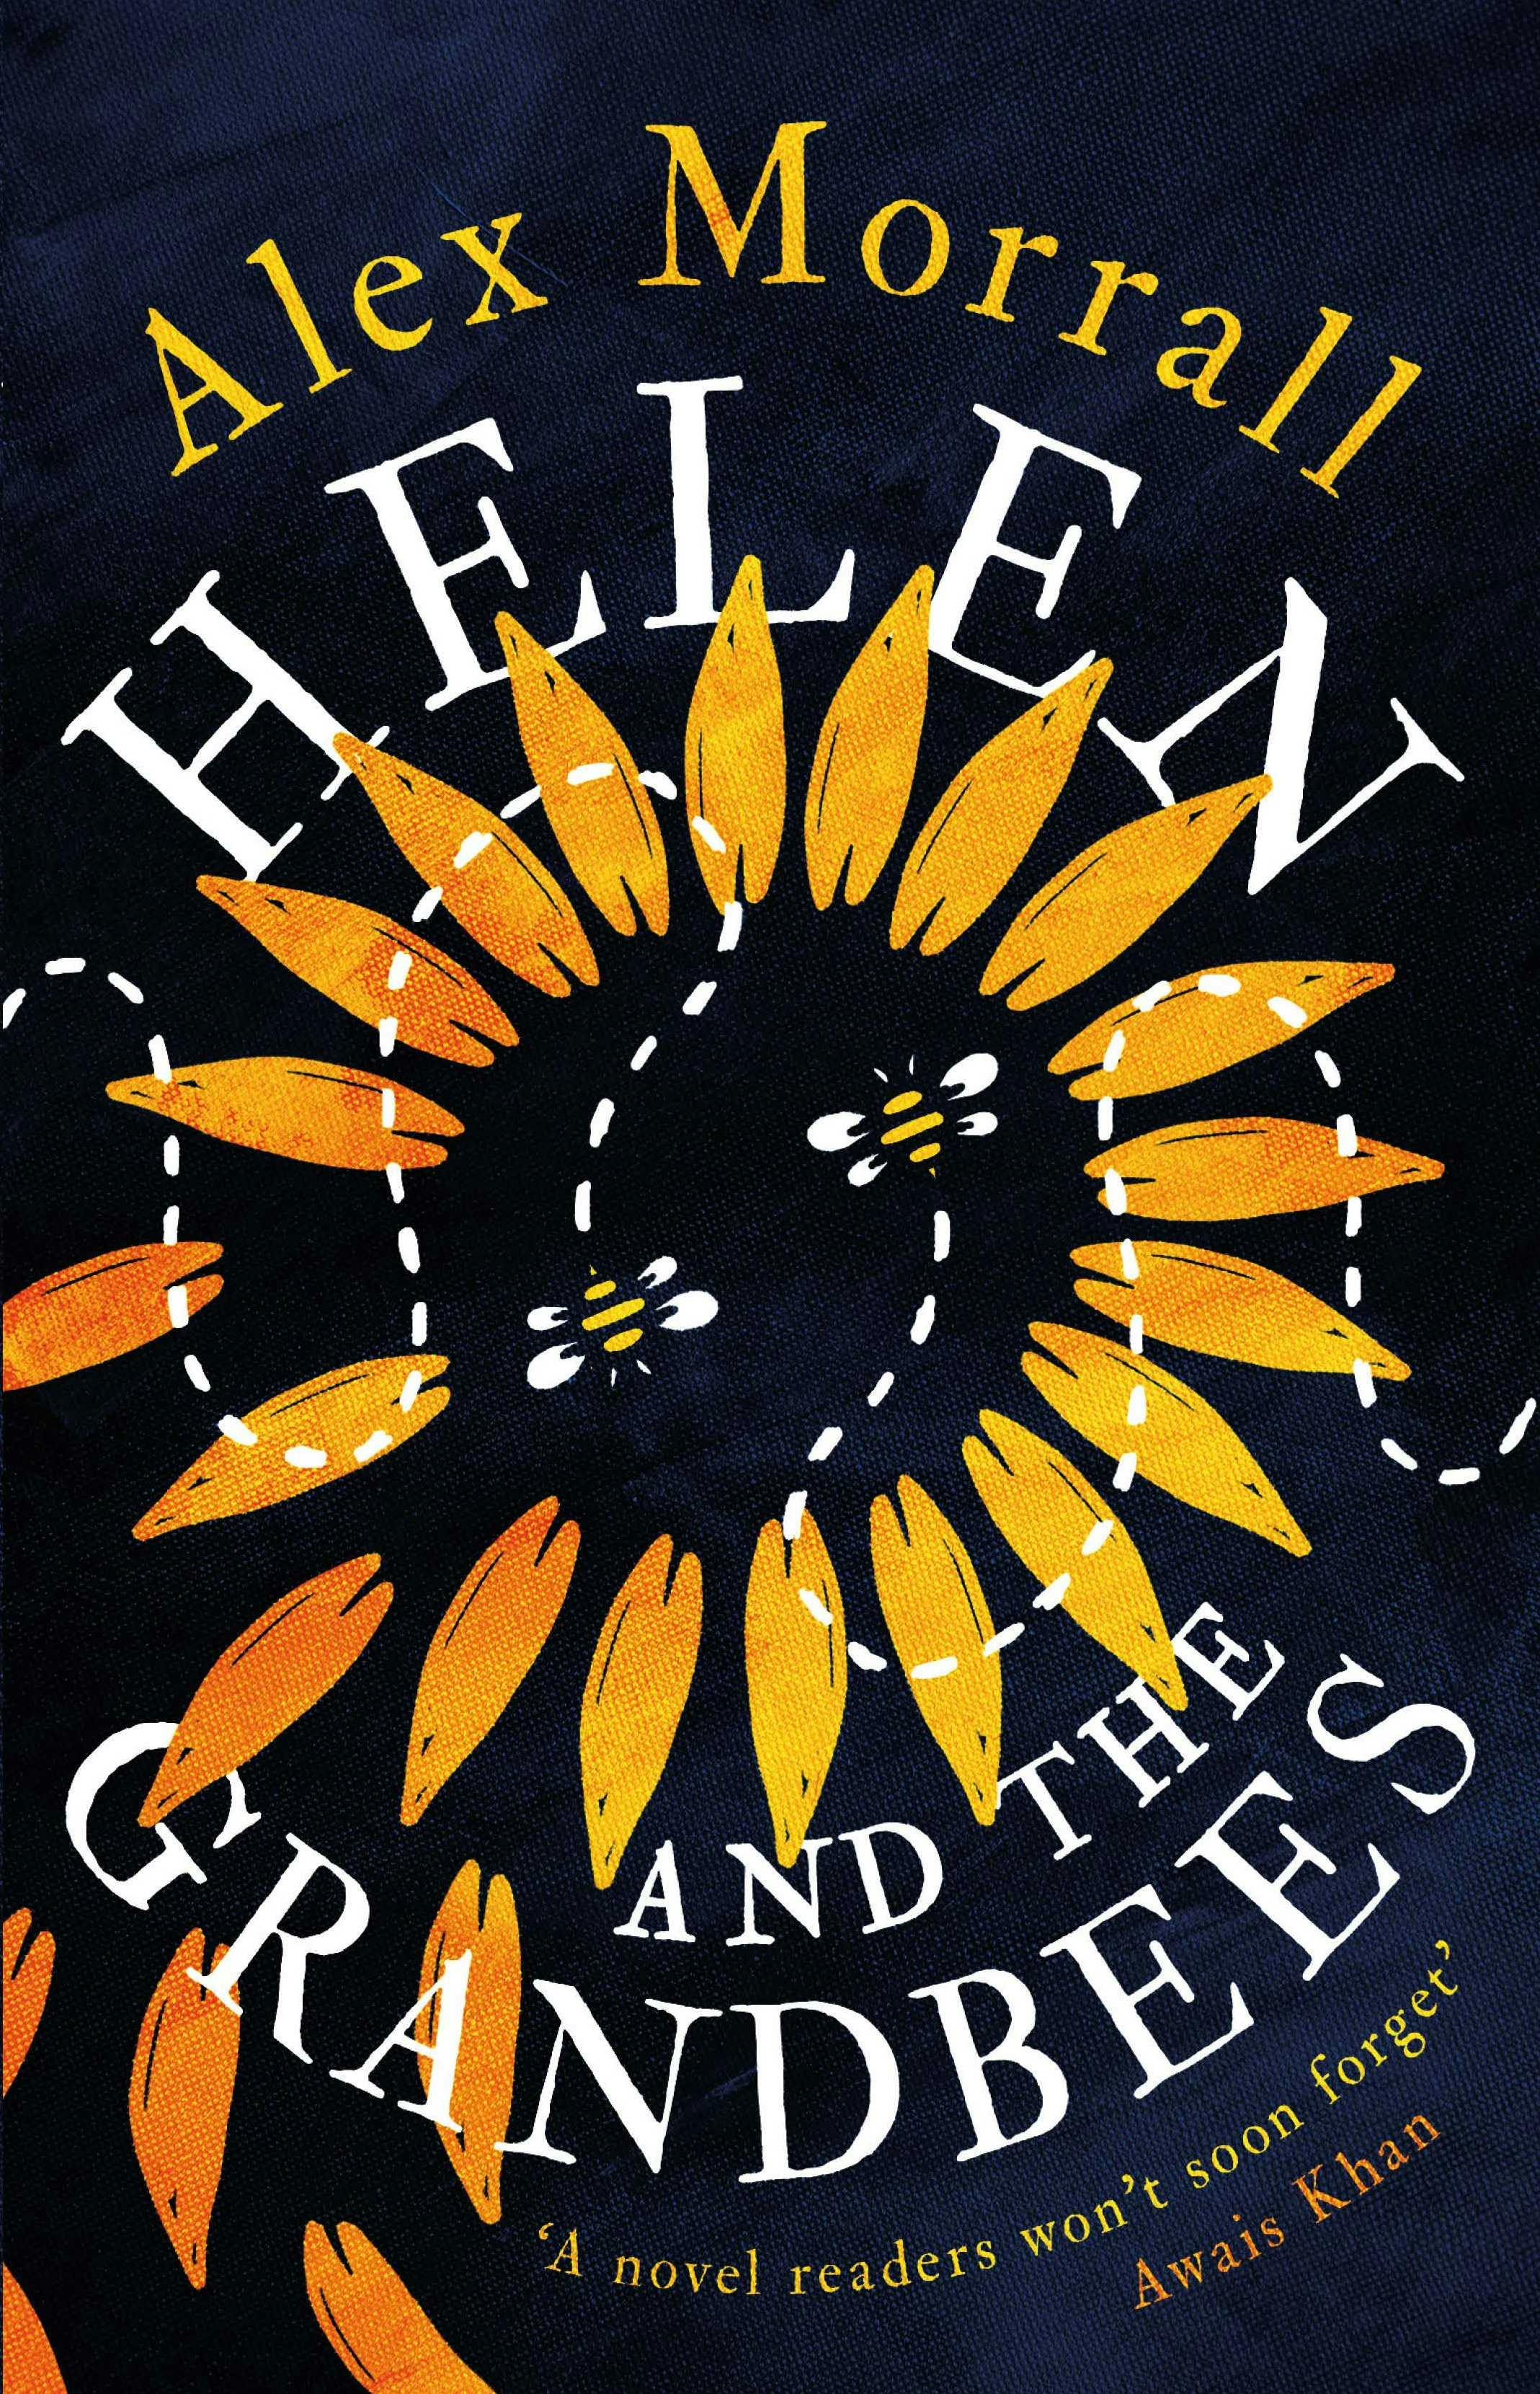 Helen and the Grandbees: 'Uplifting' Daily Mail - Alex Morrall